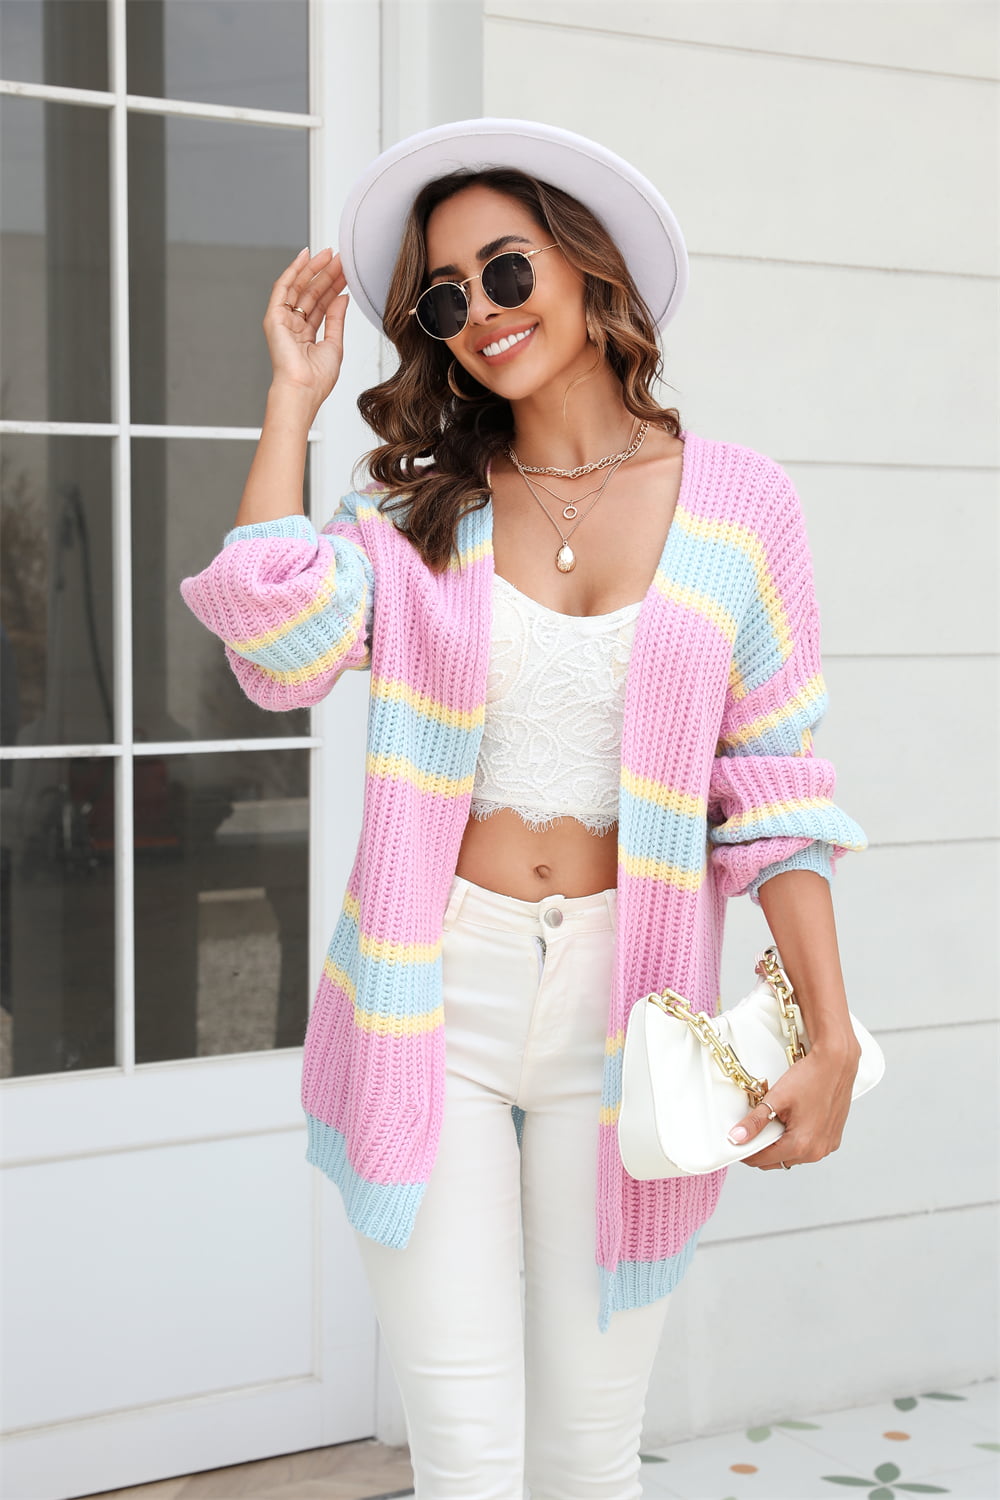 Candy Coated Cardigan - Cheeky Chic Boutique